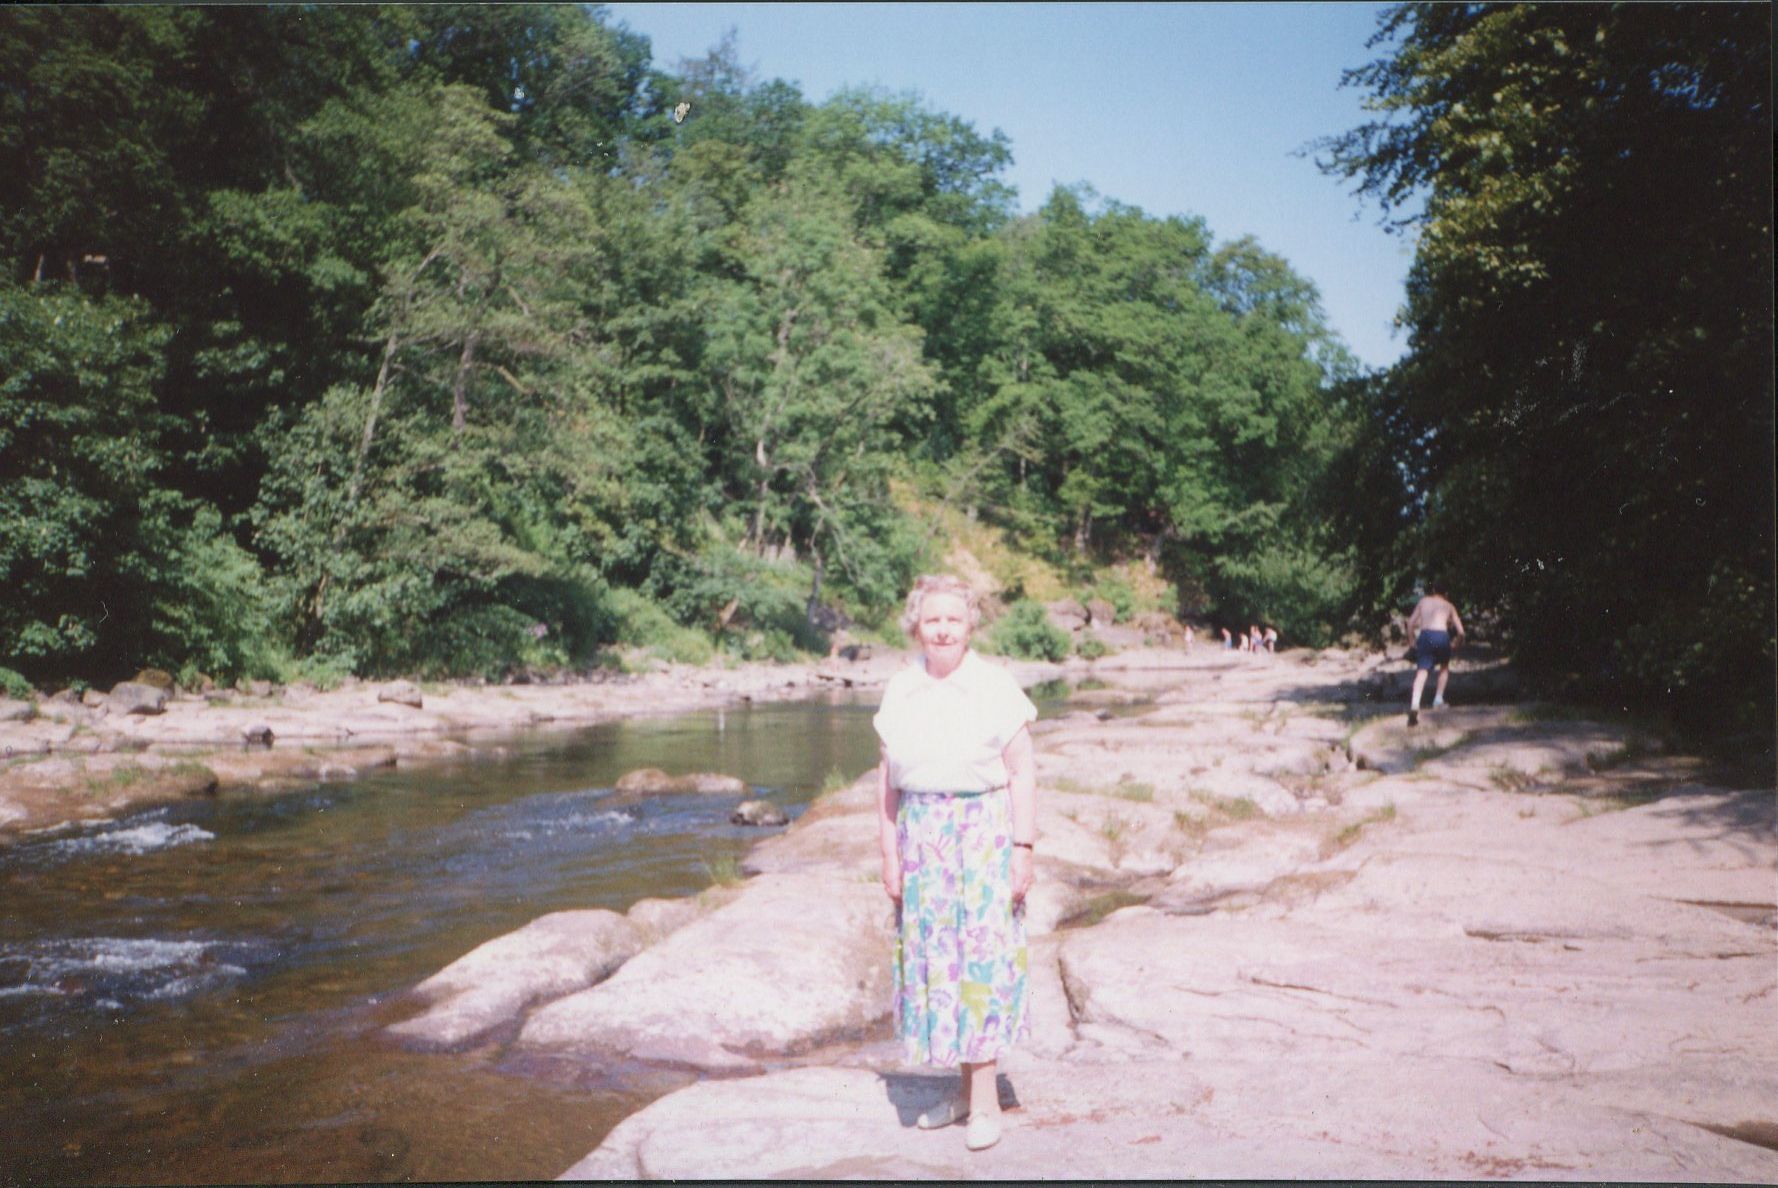 Charlotte ( Cameron ) Ingram at the River Ericht in Blairgowrie